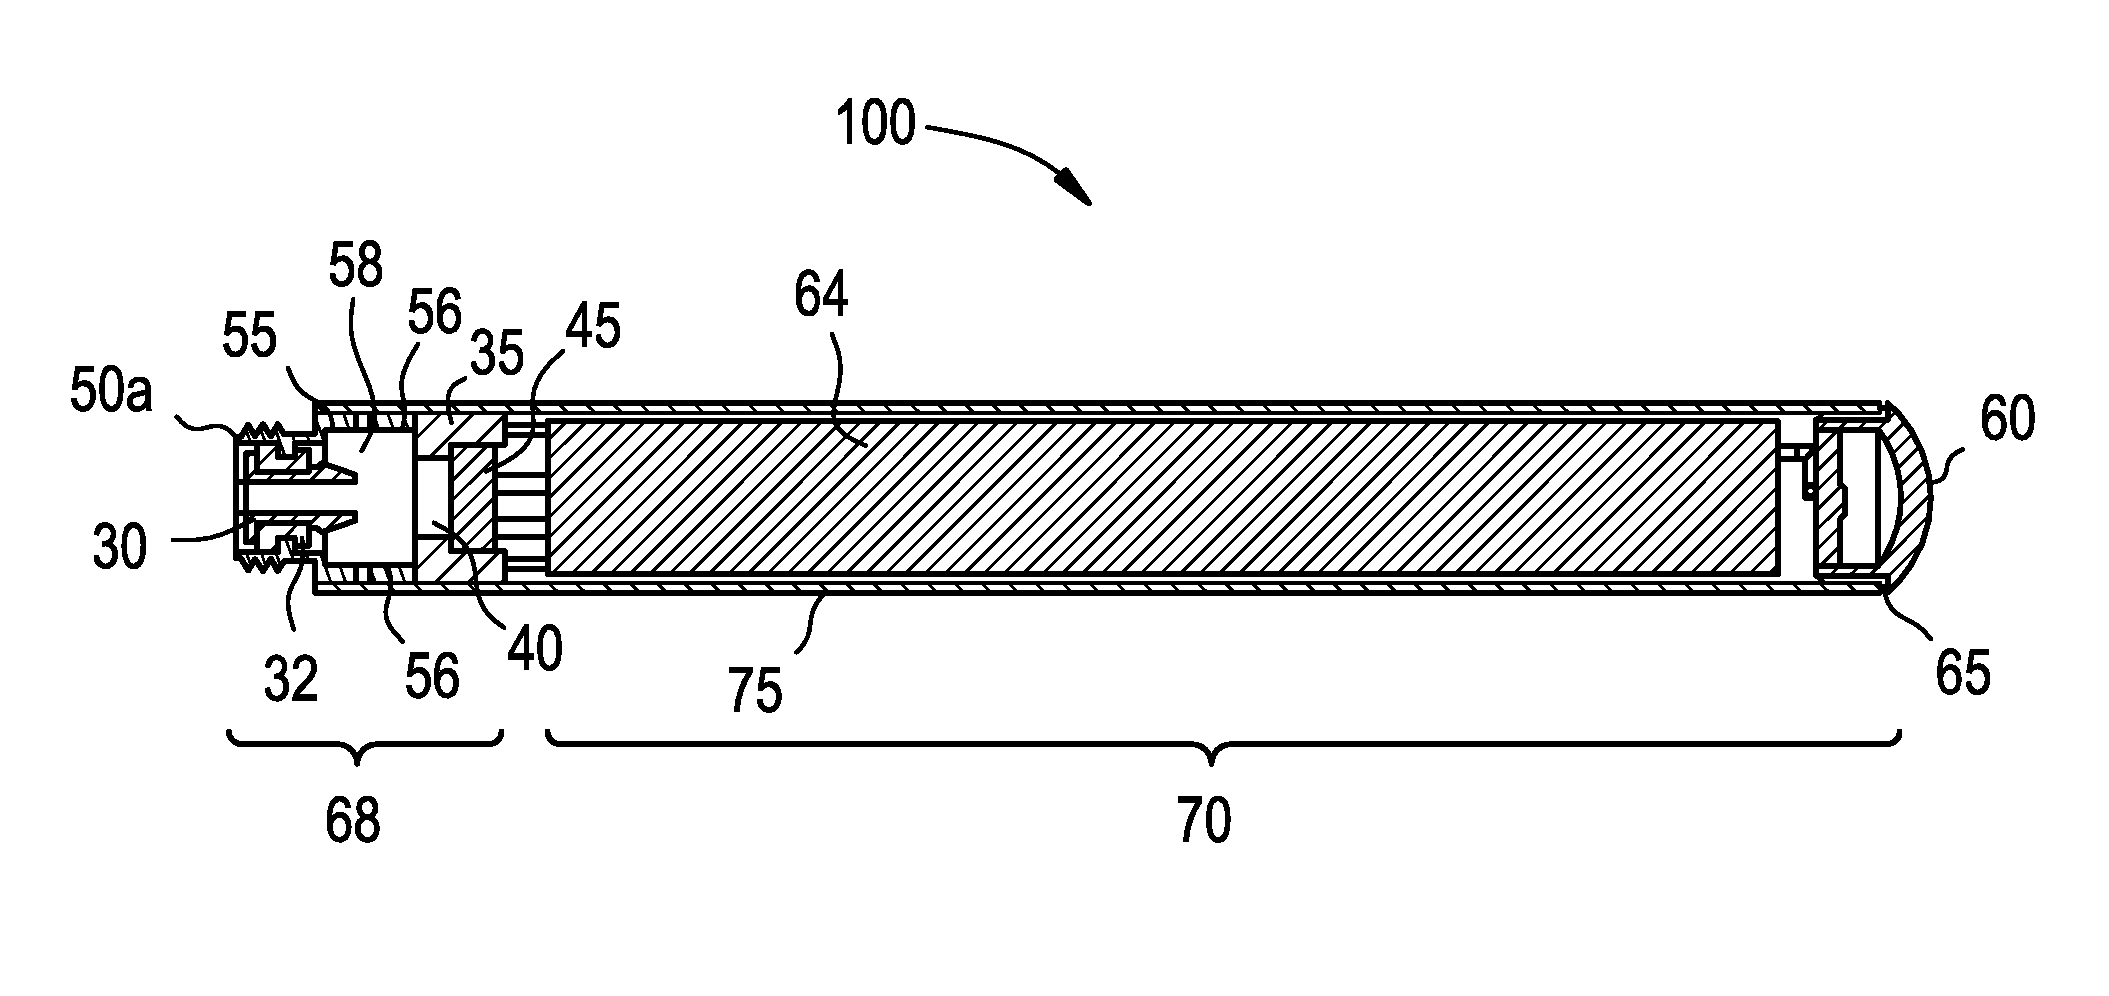 Power supply section configuration for an electronic vaping device and electronic vaping device